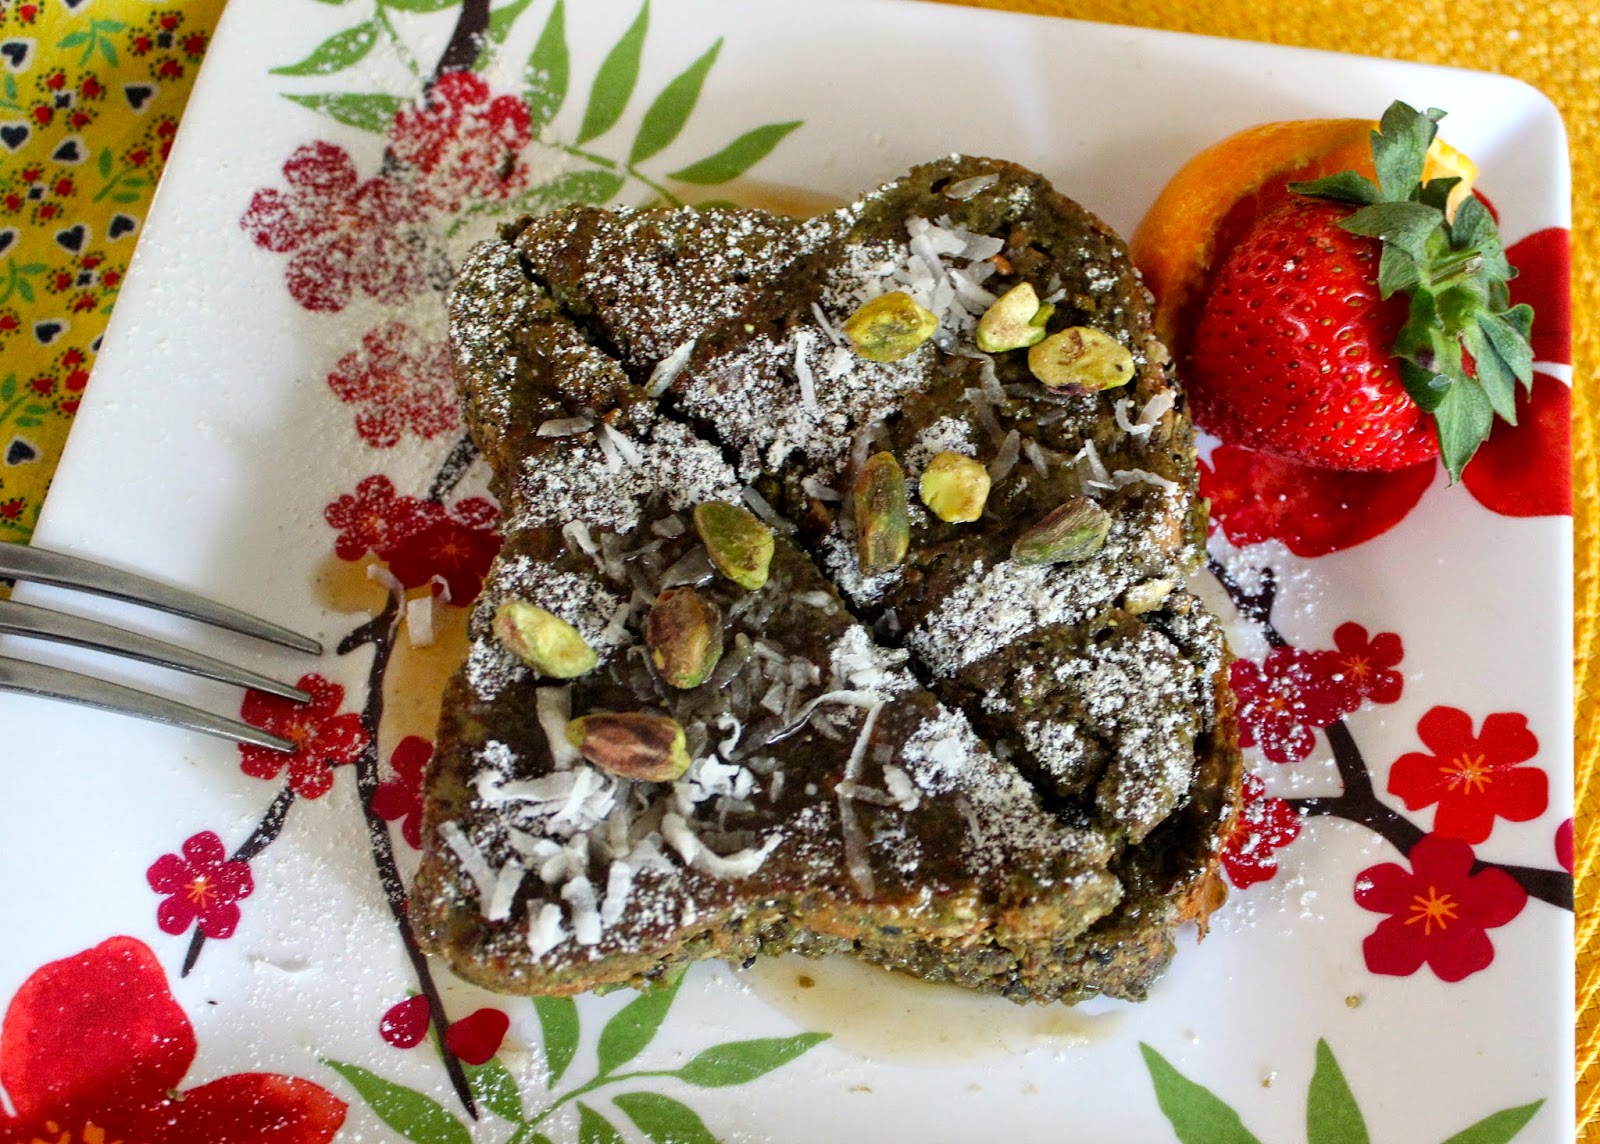 My Great, Big, Yummy Breakfast: Pistachio-Crusted Matcha Green Tea and Coconut French Toast